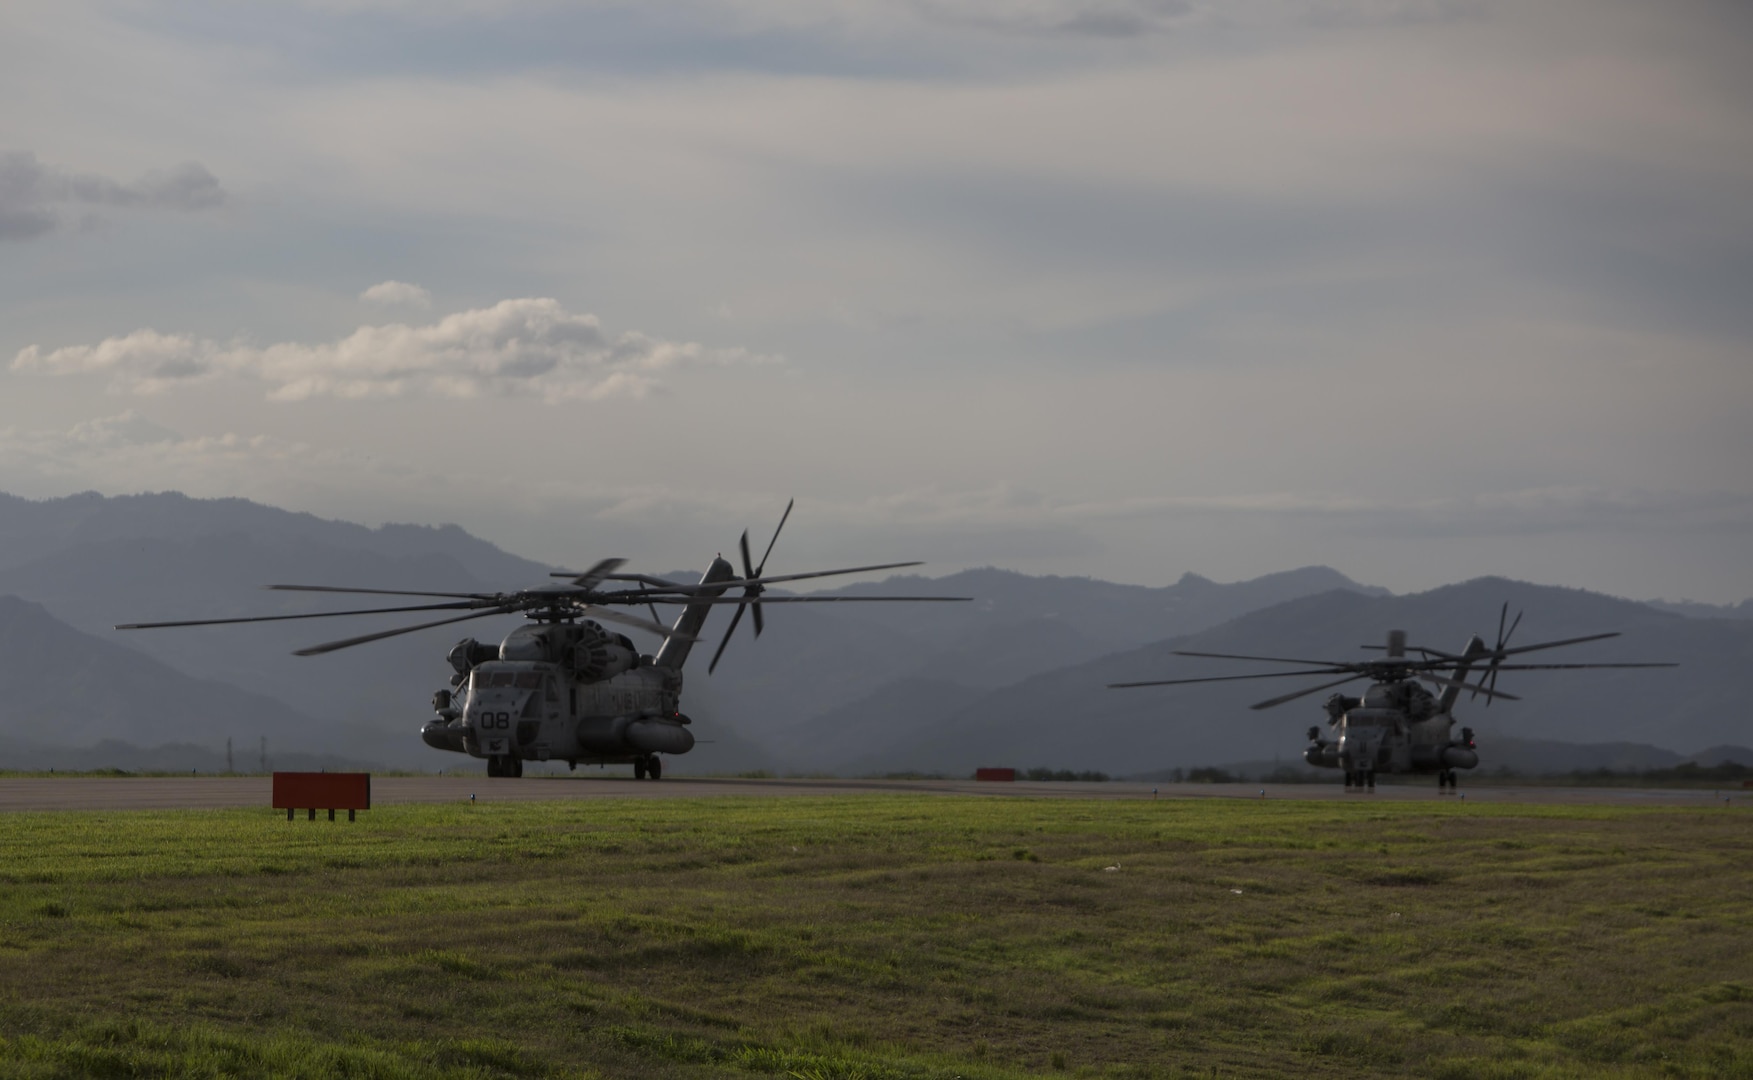 Marines with the Aviation Combat Element, Special Purpose Marine Air-Ground Task Force –Southern Command, taxi down the runway in CH-53E Super Stallion helicopters June 1, 2017, at Soto Cano Air Base, Honduras. The main body of SPMAGTF-SC arrived in Honduras to begin their six-month deployment in Central America. The task force, comprised of approximately 300 Marines from both active and reserve components, will operate in Belize, El Salvador, Guatemala and Honduras from June to November to conduct engineering projects and build upon security cooperation efforts and established relationships in the region. (U.S. Marine Corps photo by Sgt. Ian Leones)